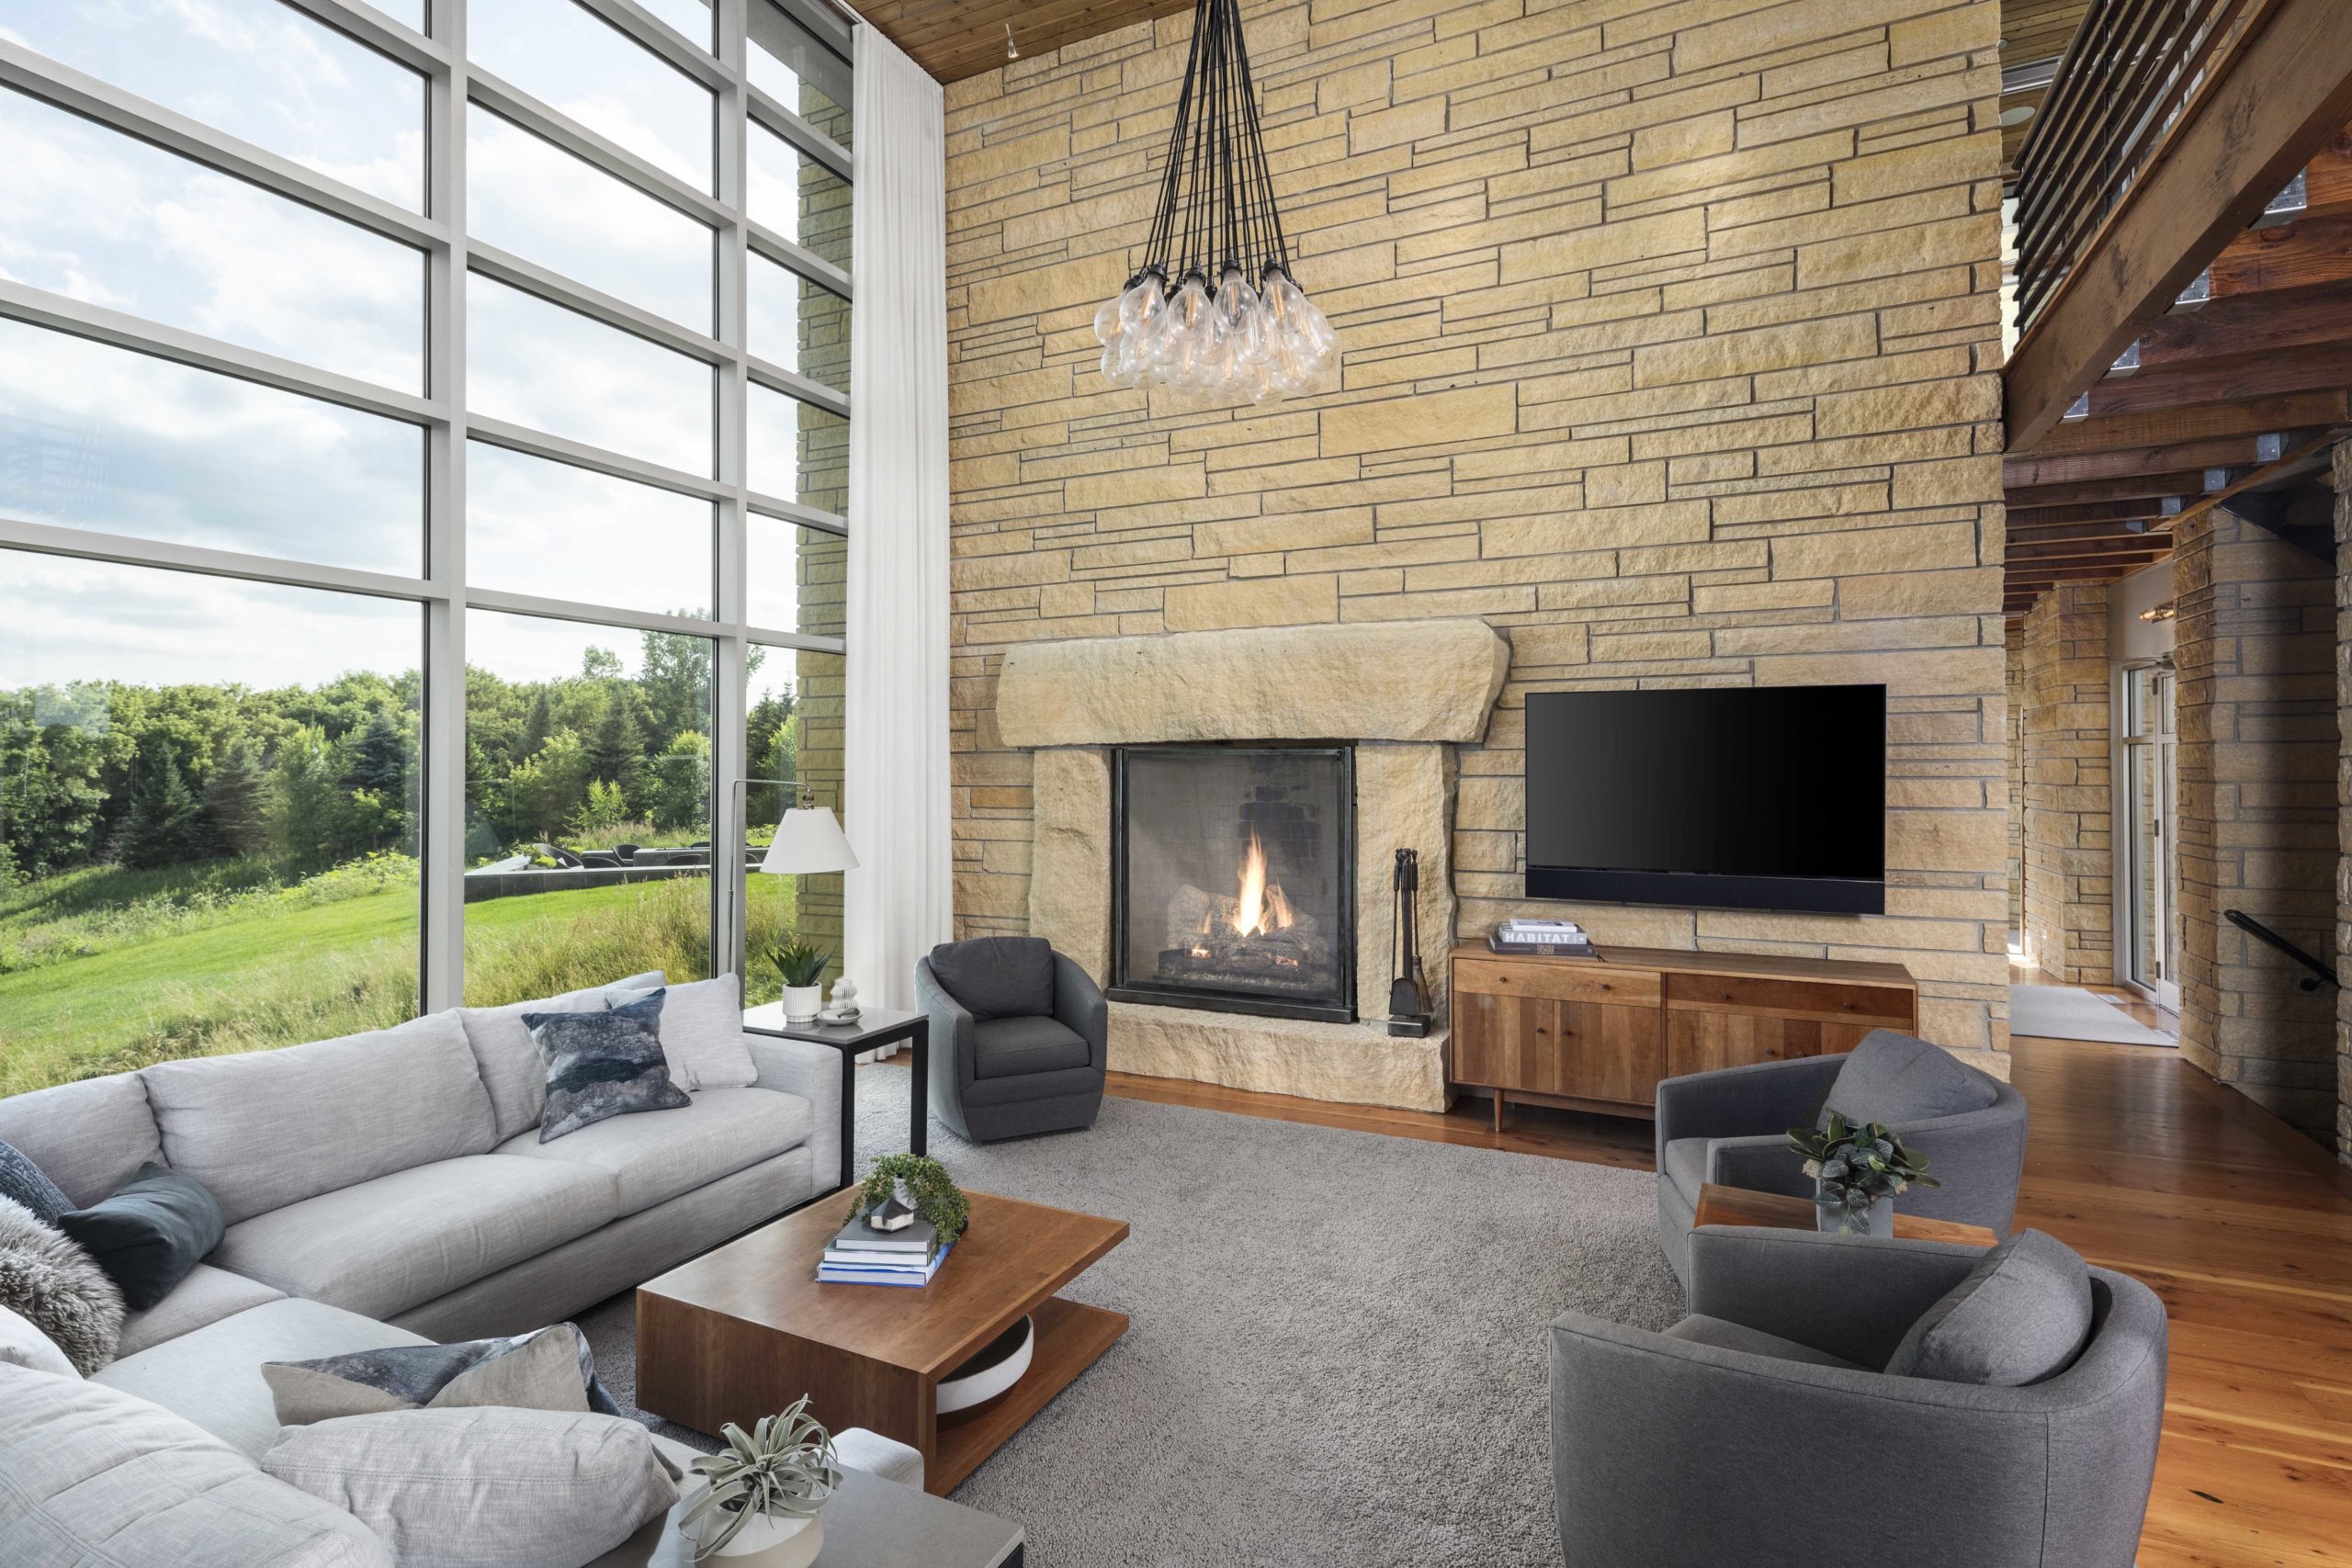 A contemporary living room with large windows and a fireplace.